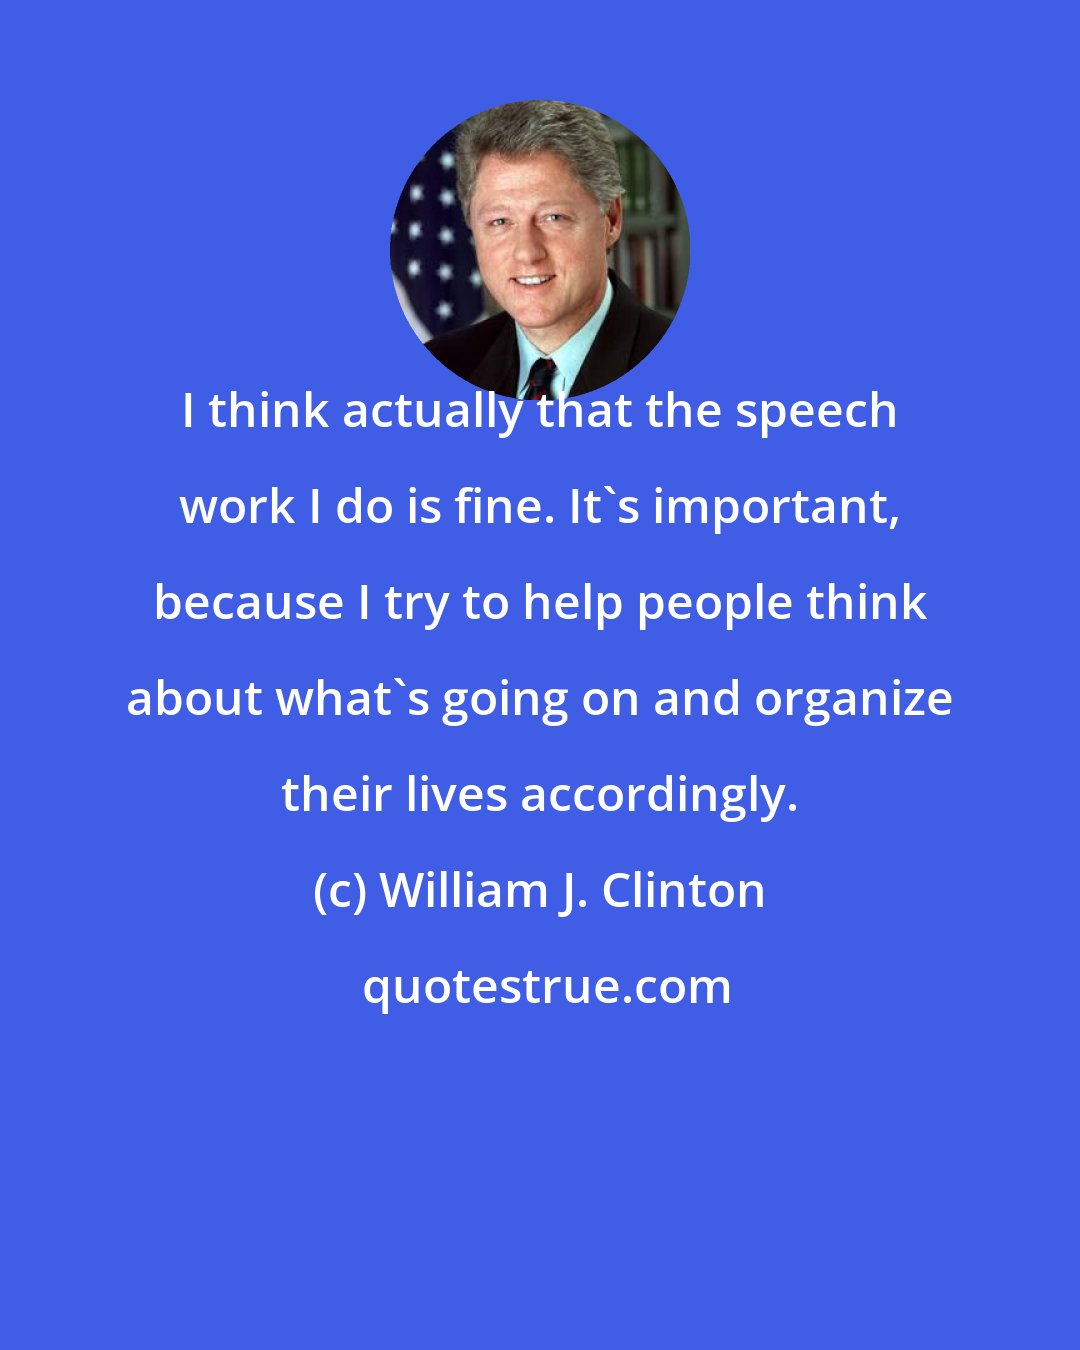 William J. Clinton: I think actually that the speech work I do is fine. It's important, because I try to help people think about what's going on and organize their lives accordingly.